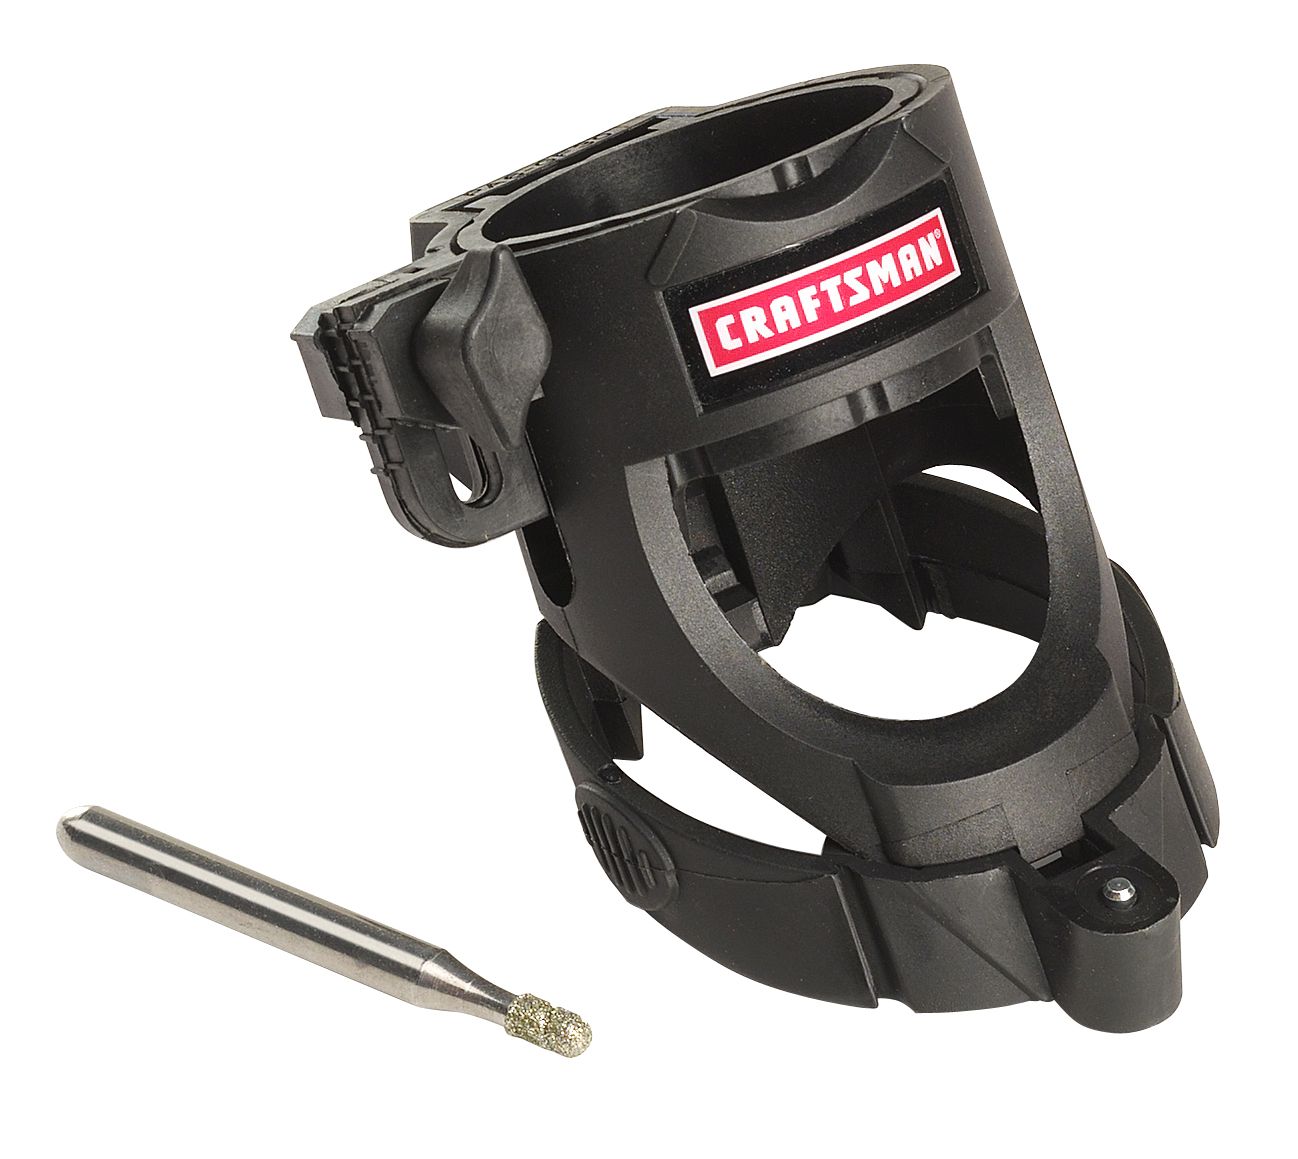 Craftsman Grout Removal Attachment Kit